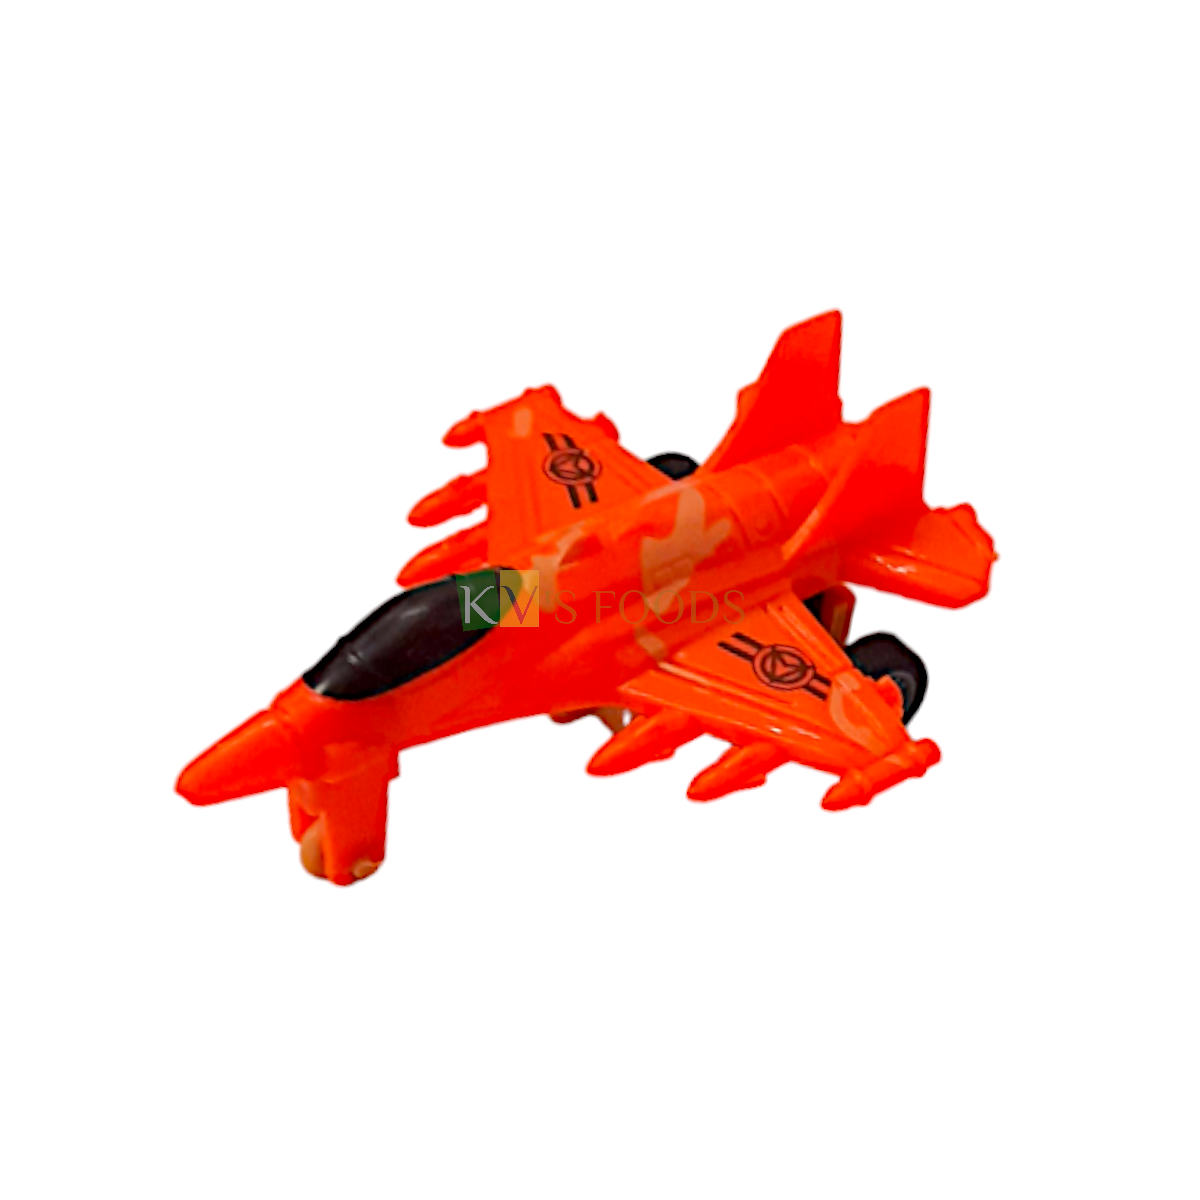 1PC Orange Pull Back and Go Military Fighter Jet Plane Cake Topper, Plane Toys For Kids, Airplane, Aeroplane Cake Topper Toy for Cakes Decoration, Miniature Figurine Cake Topper for Pilot Theme